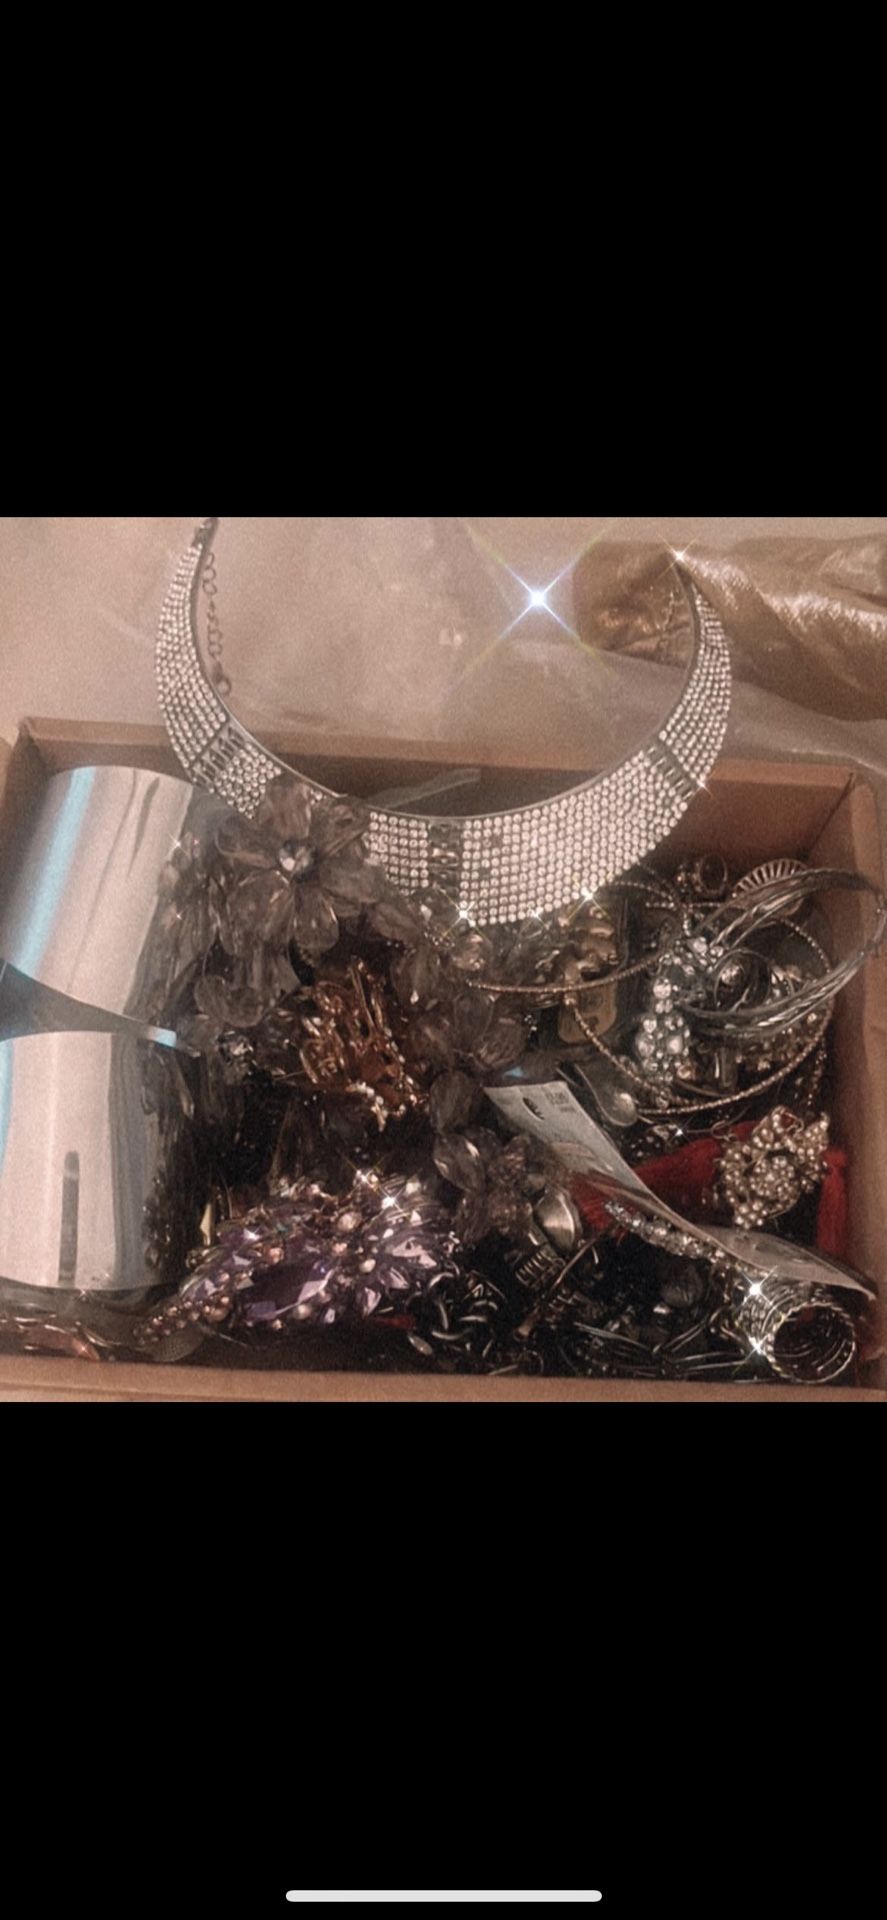 Big Box of Scrap Costume Jewelry for Crafting